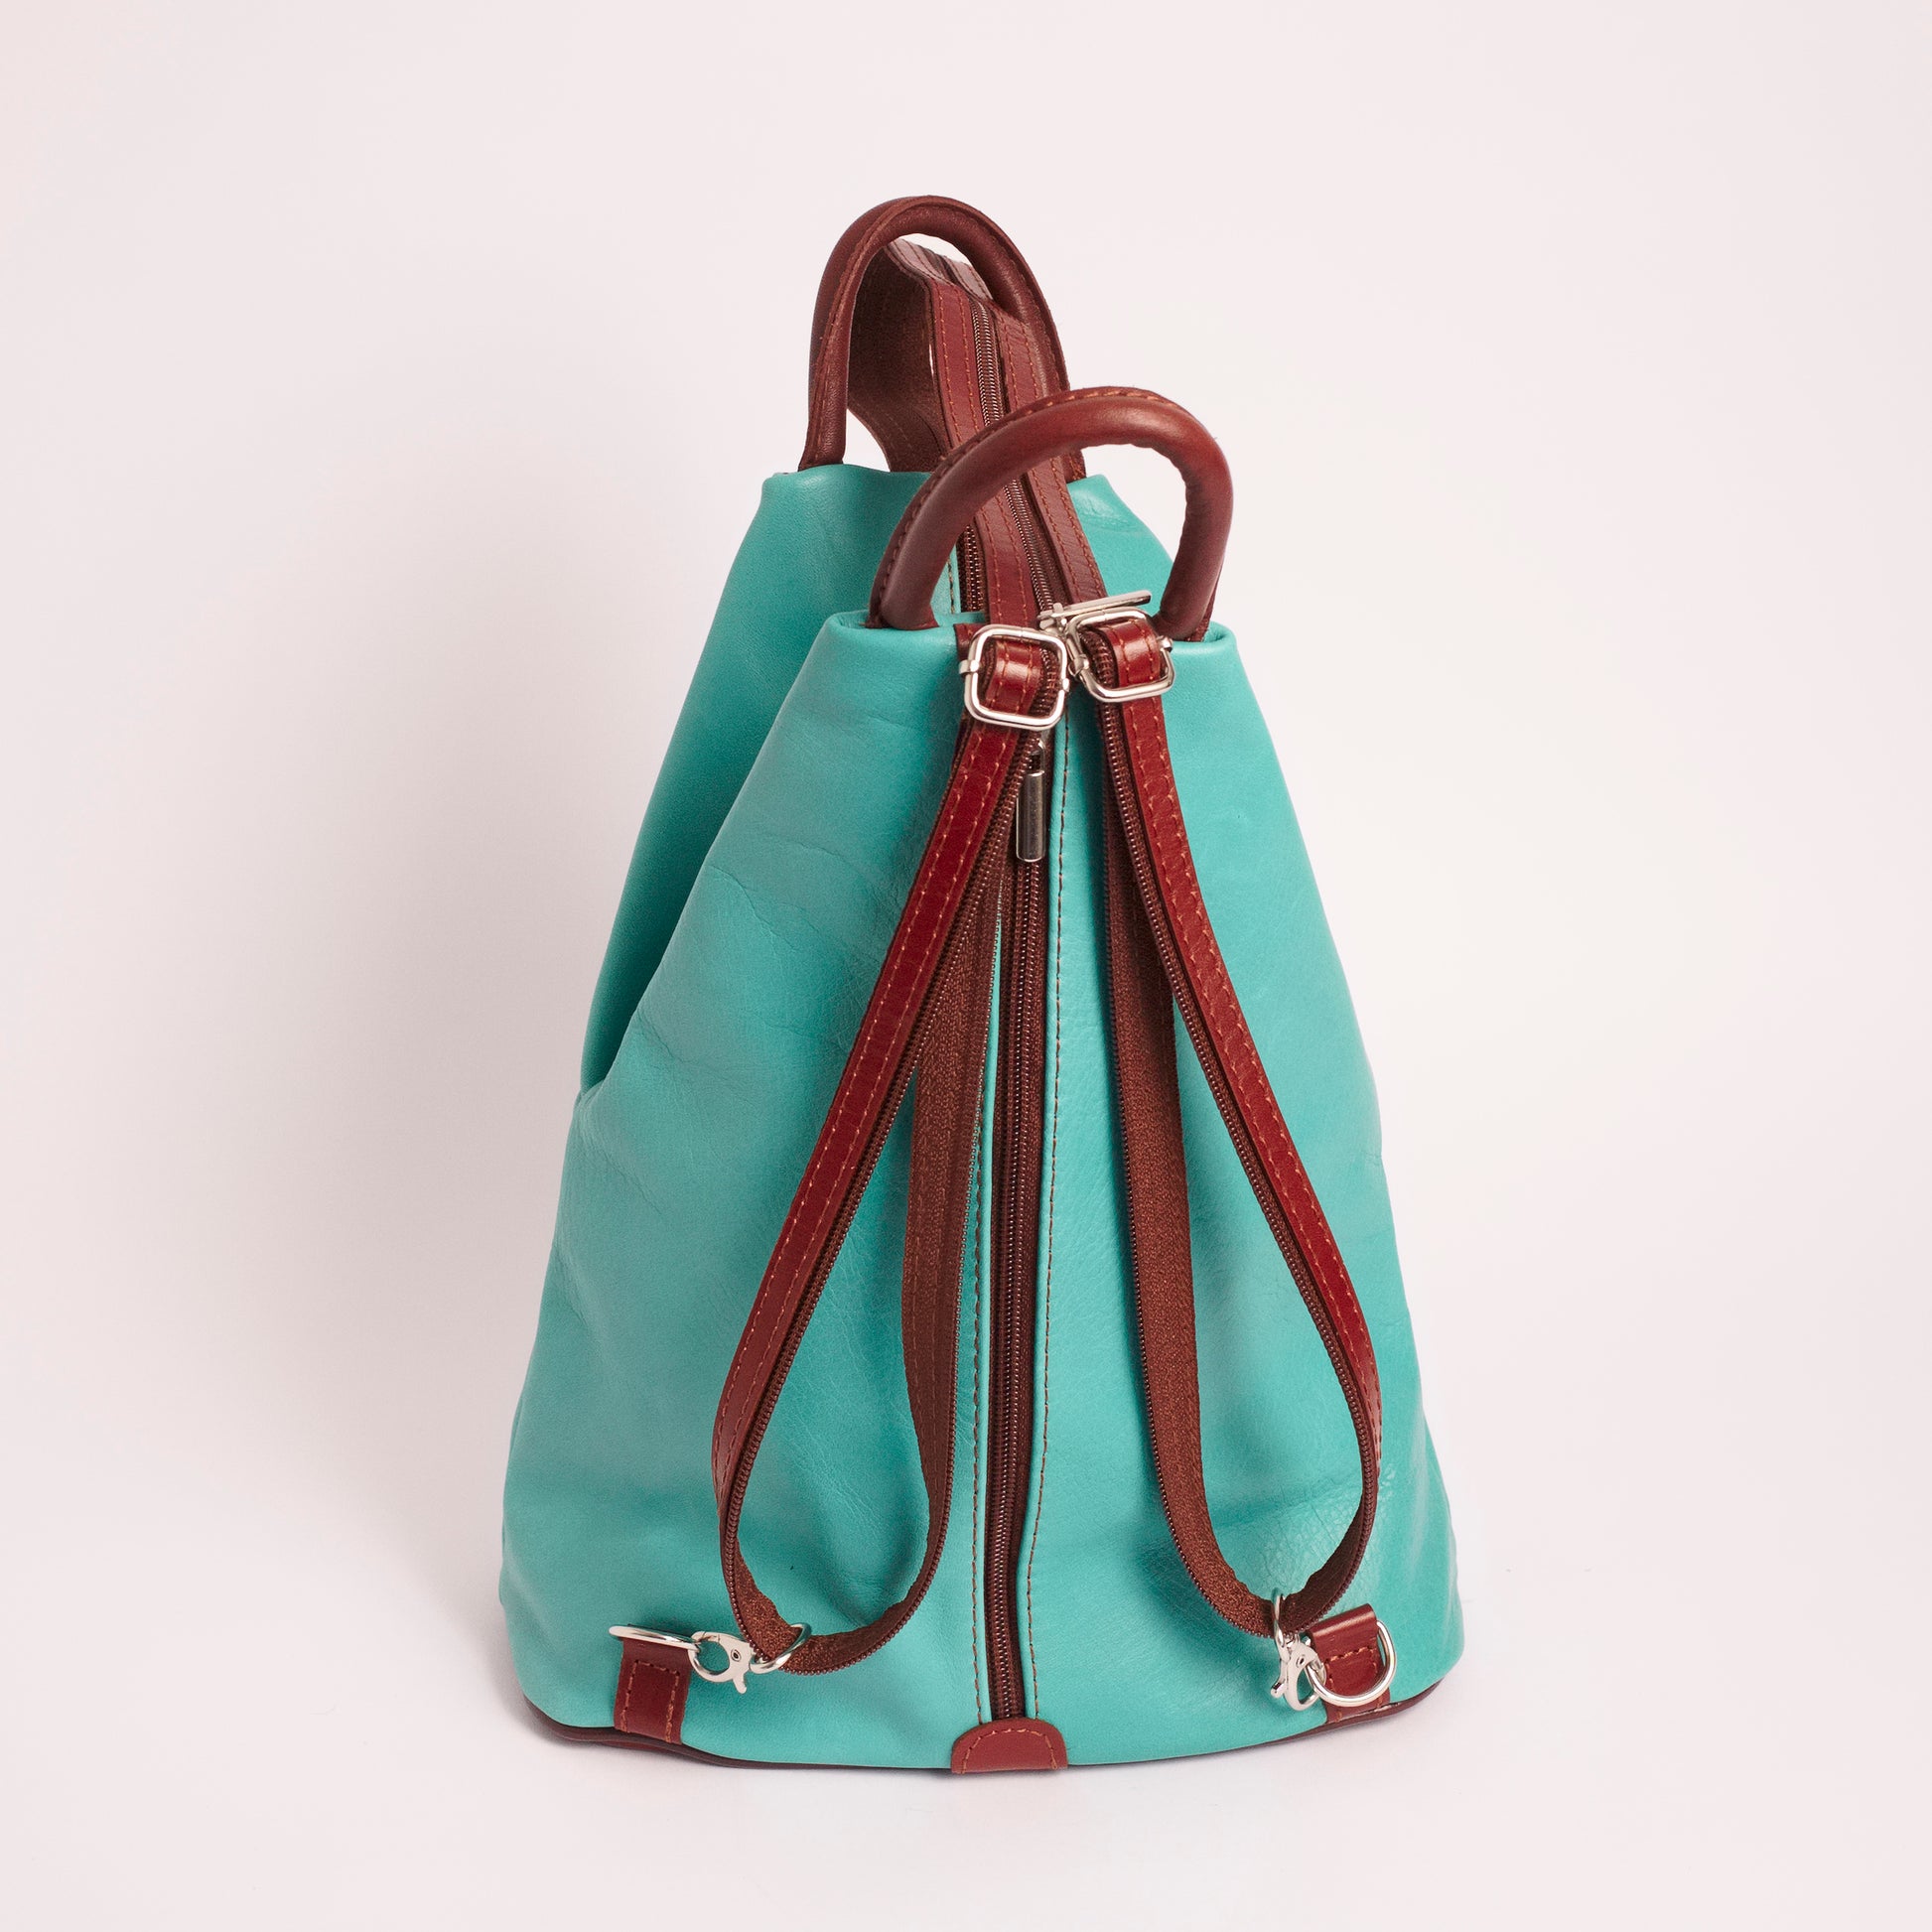 Vernazzo Teal Brown Italian Leather Shoulder Backpack Solo Perché Bags.